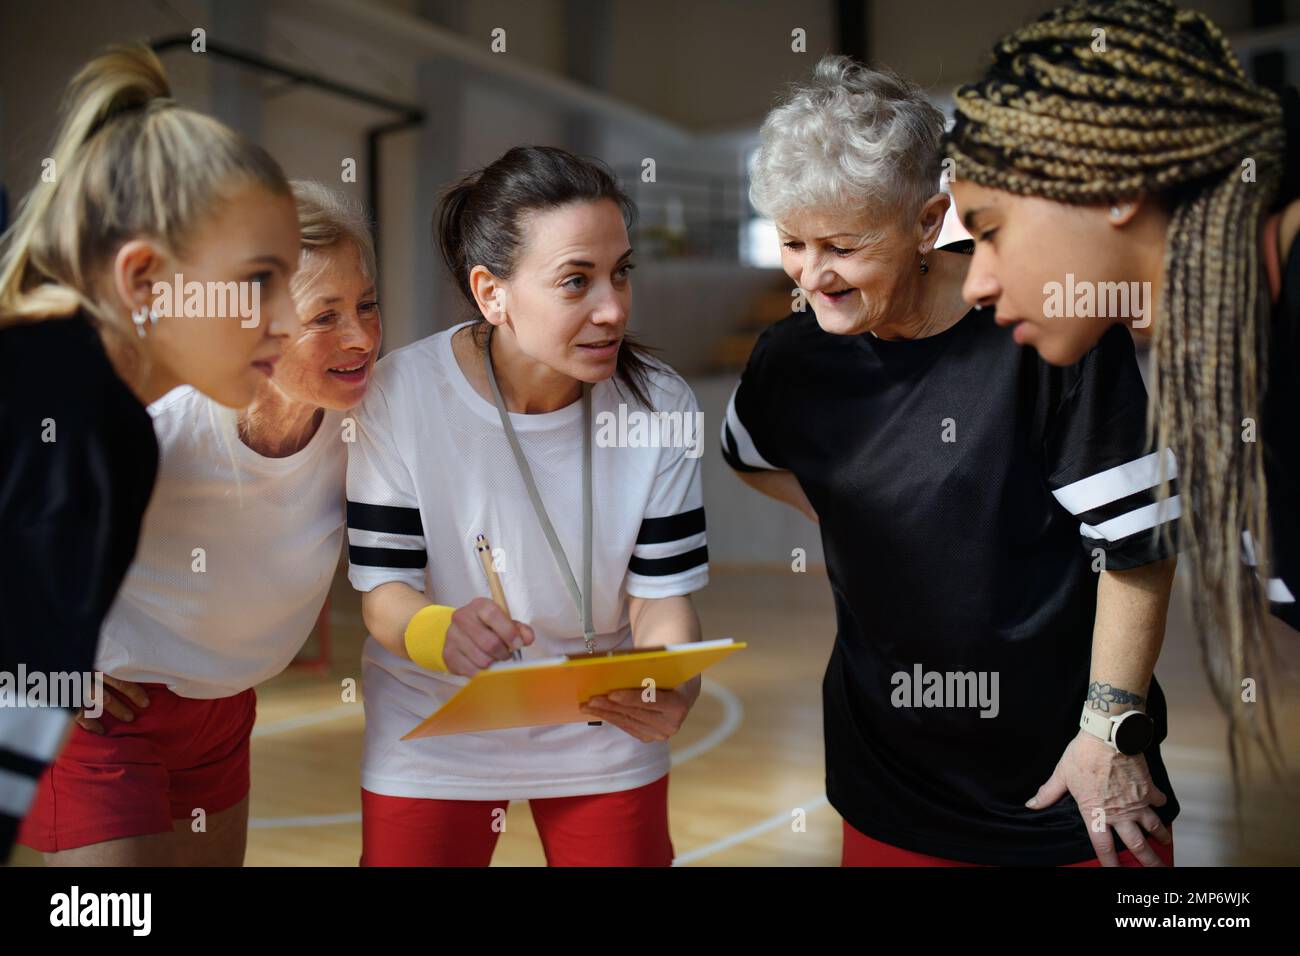 Female sport coach with clipboard discussing tactics with young and old women team training for match in gym. Stock Photo